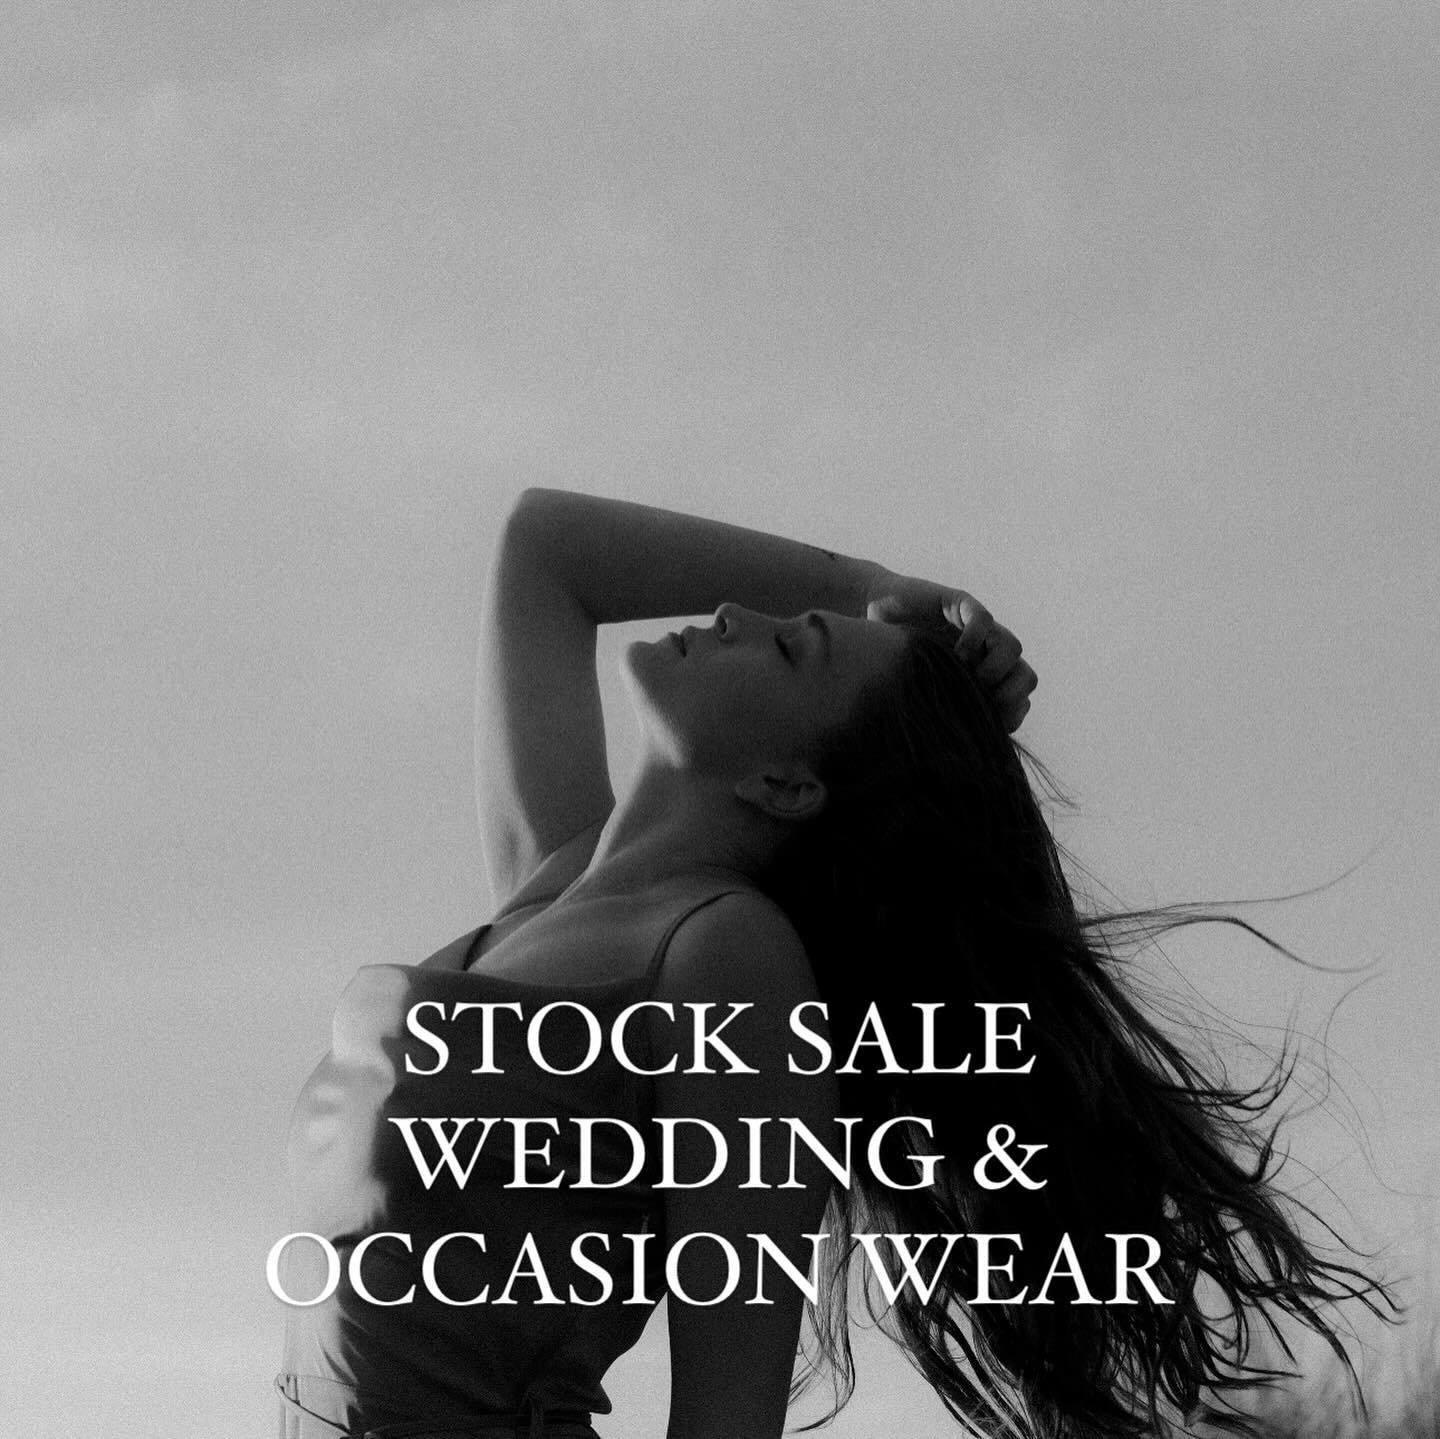 WEDDING &amp; OCCASION WEAR STOCK SALE! 

On Sunday May 5, we invite you to our HQ to shop our stock wedding &amp; occasion wear collection at -70%!

The collection is full of dresses &amp; jumpsuits in matching colors and fabrics, yet in different f